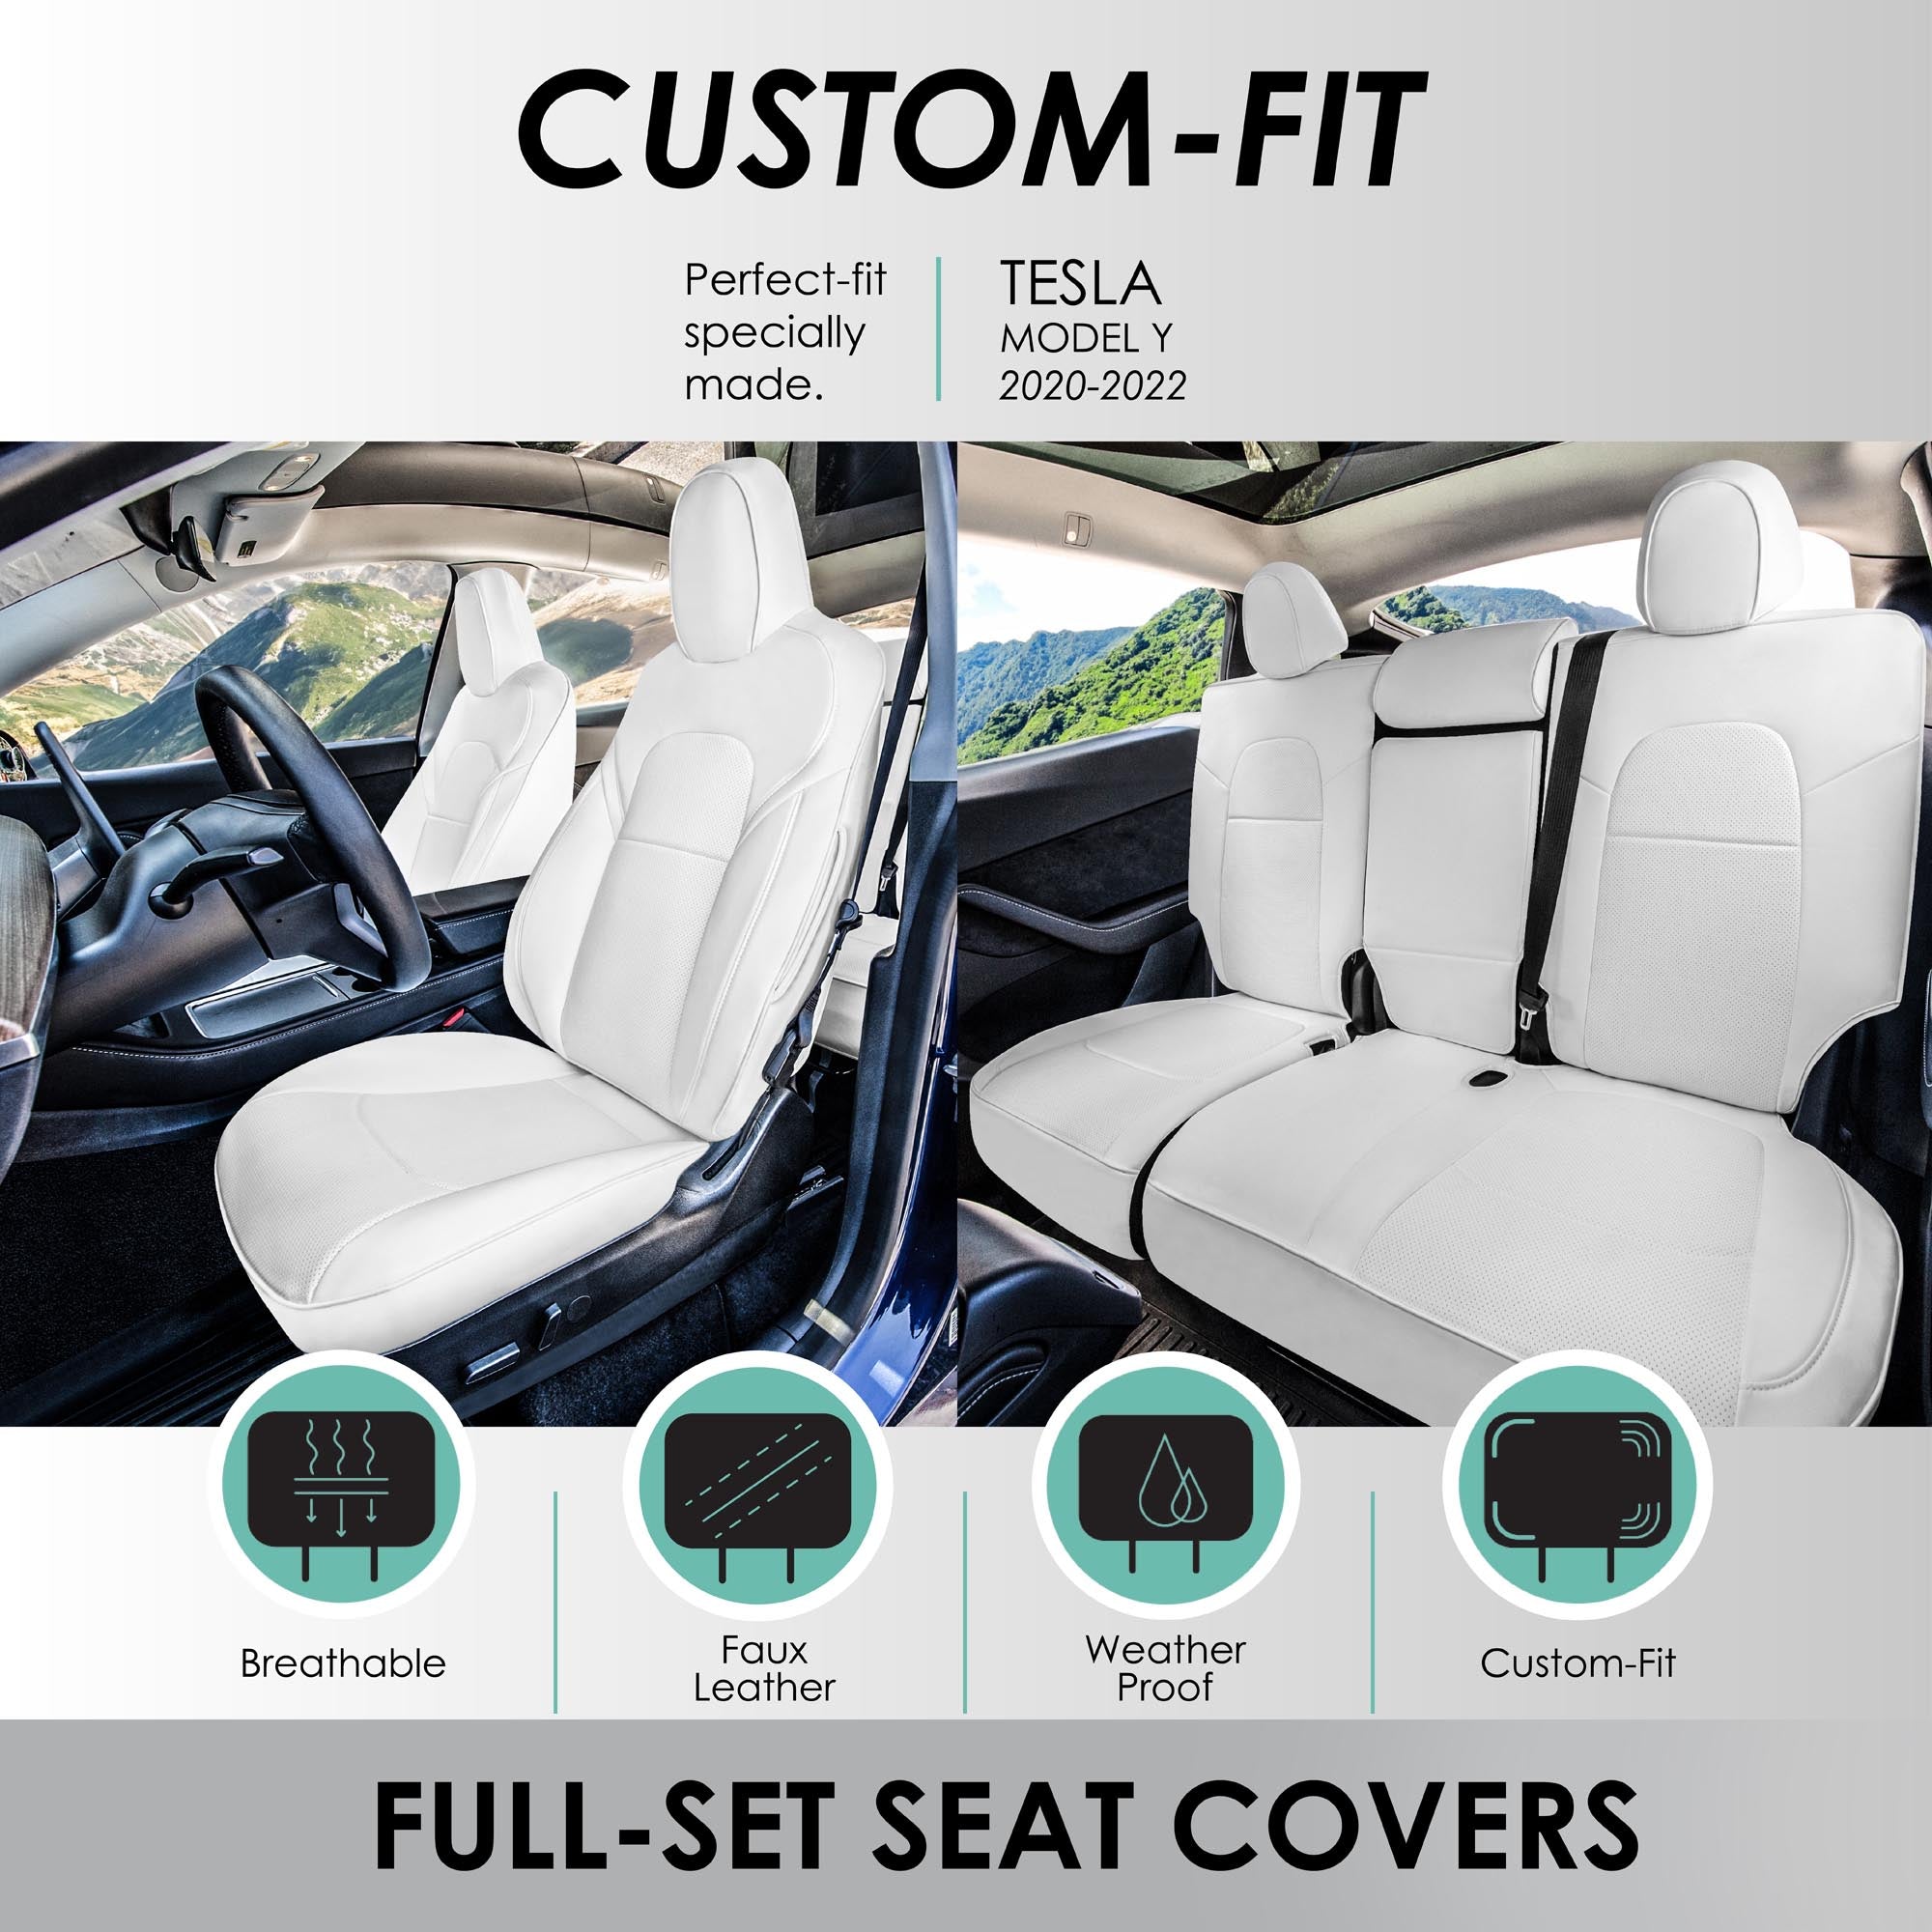 Tesla Model Y 2020 - 2024 - Full Set Seat Covers - Solid White Faux Leather